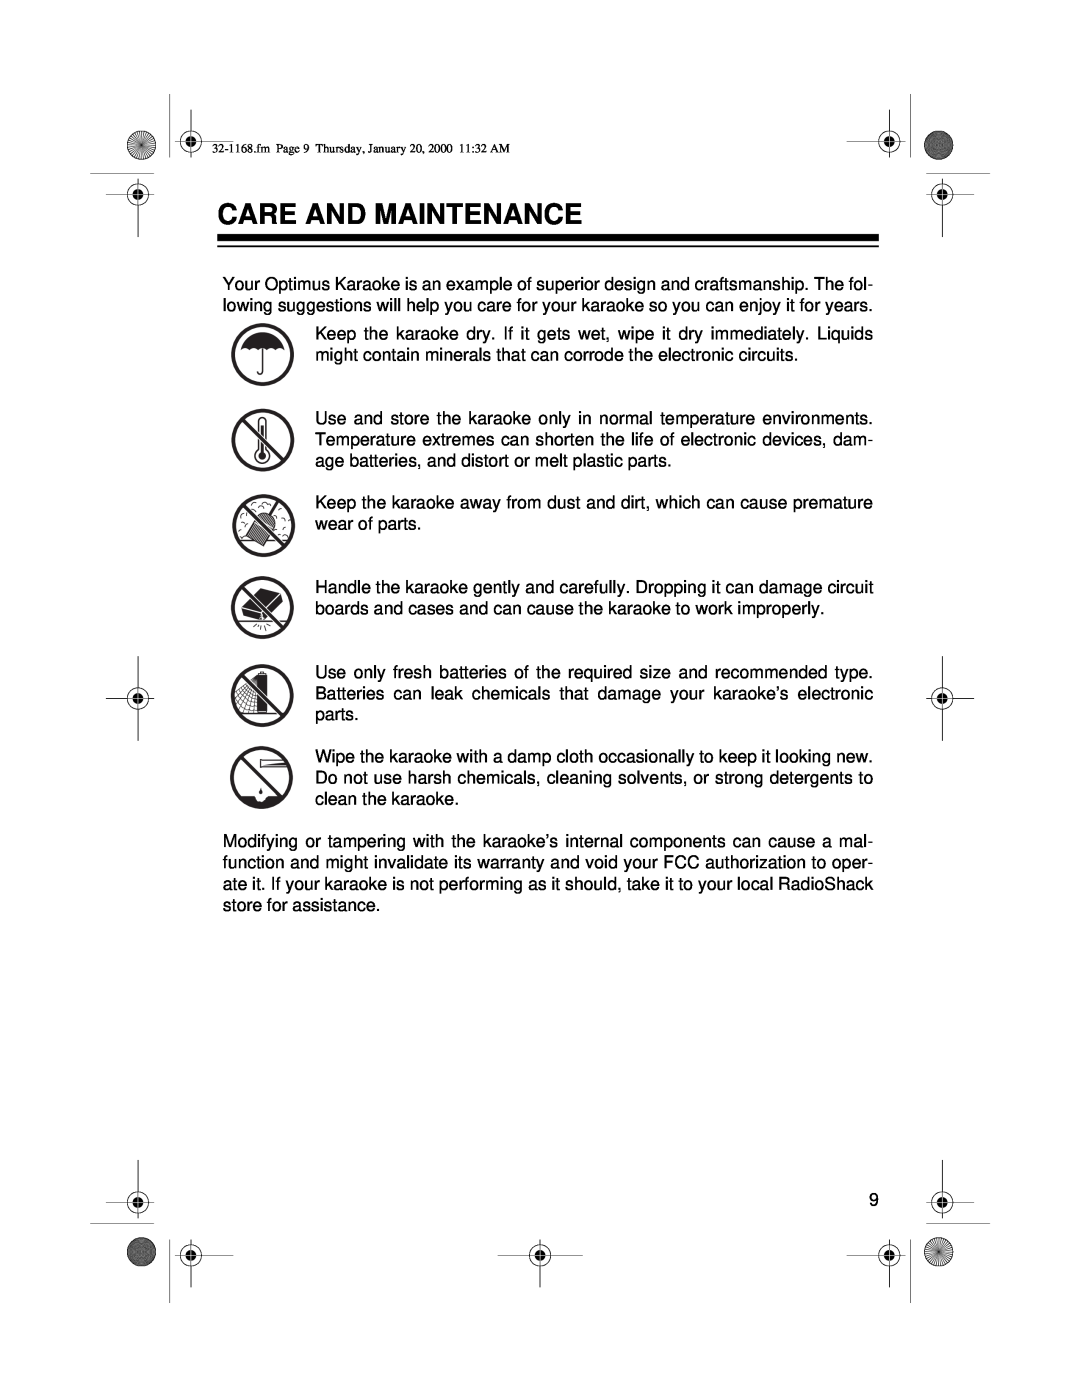 Optimus 32-1168 owner manual Care And Maintenance, fm Page 9 Thursday, January 20, 2000 1132 AM 